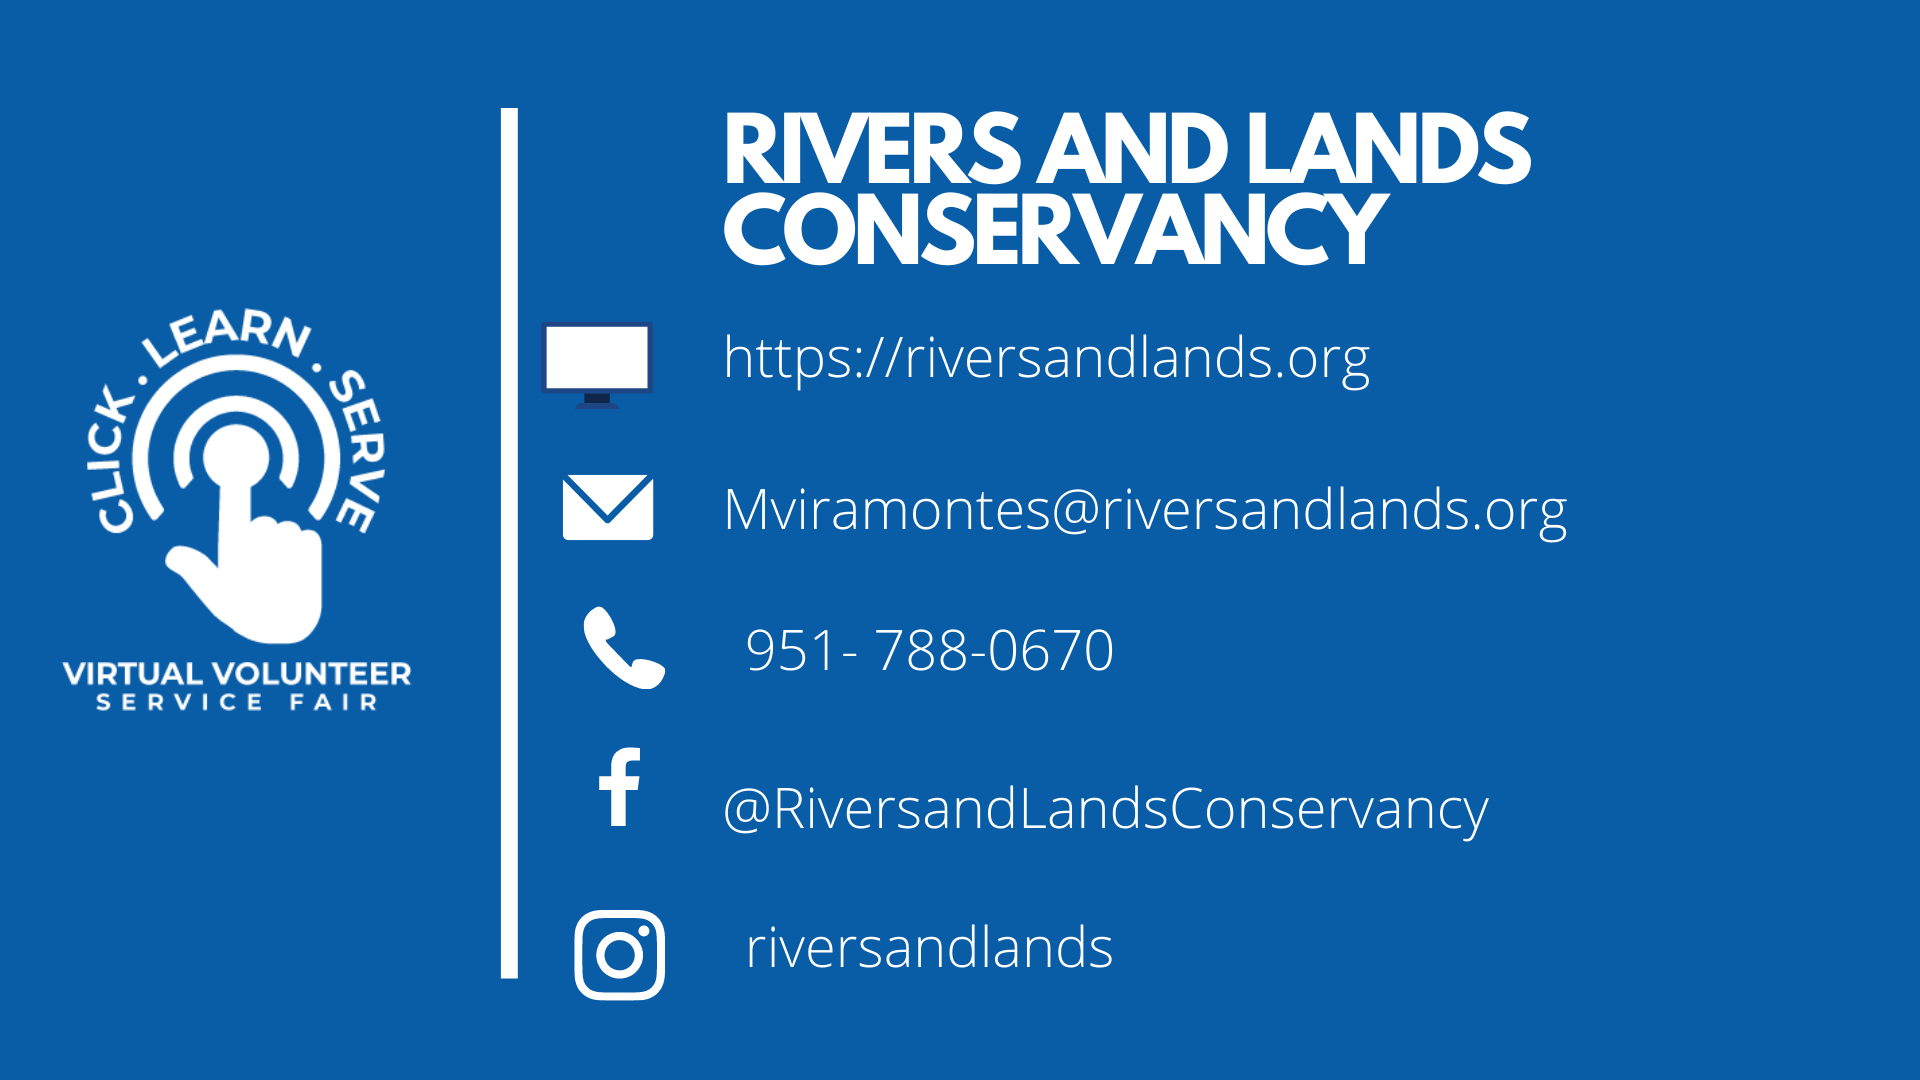 Rivers and Lands Conservancy nonprofit video for Virtual Volunteer Service Fair.